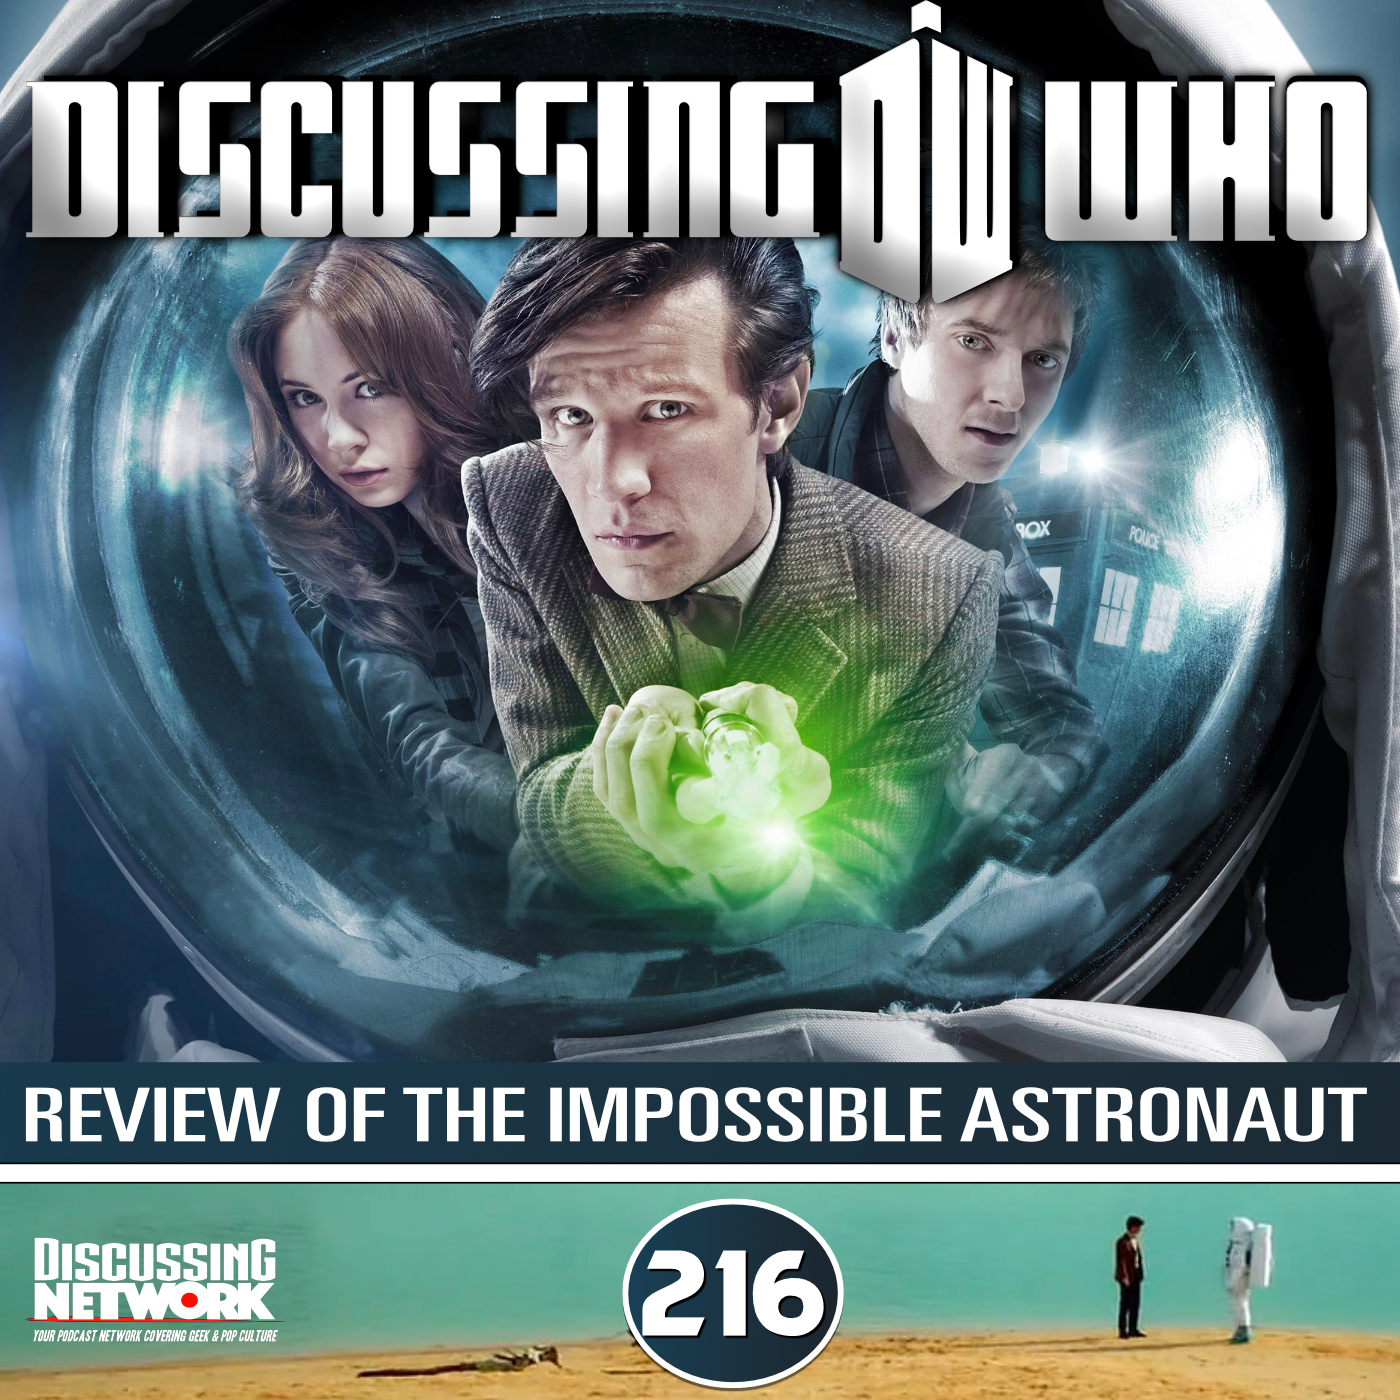 Review of The Impossible Astronaut, Doctor Who Series 6 Episode 1